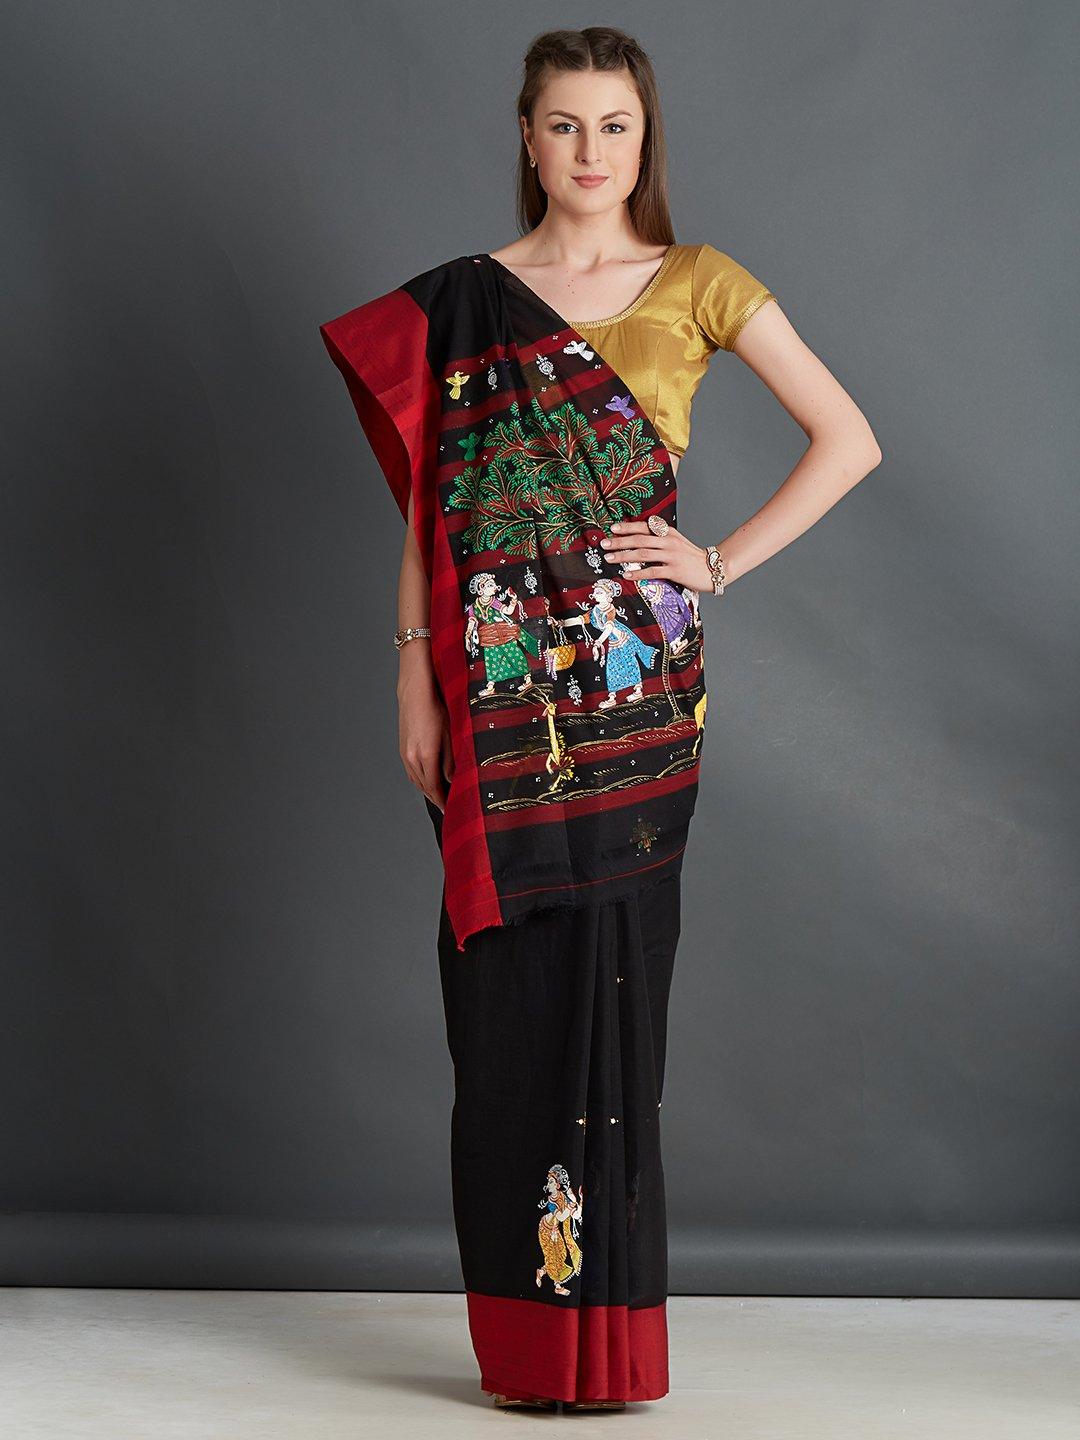 Black Cotton Saree with Pattachitra Motifs - Crafts Collection